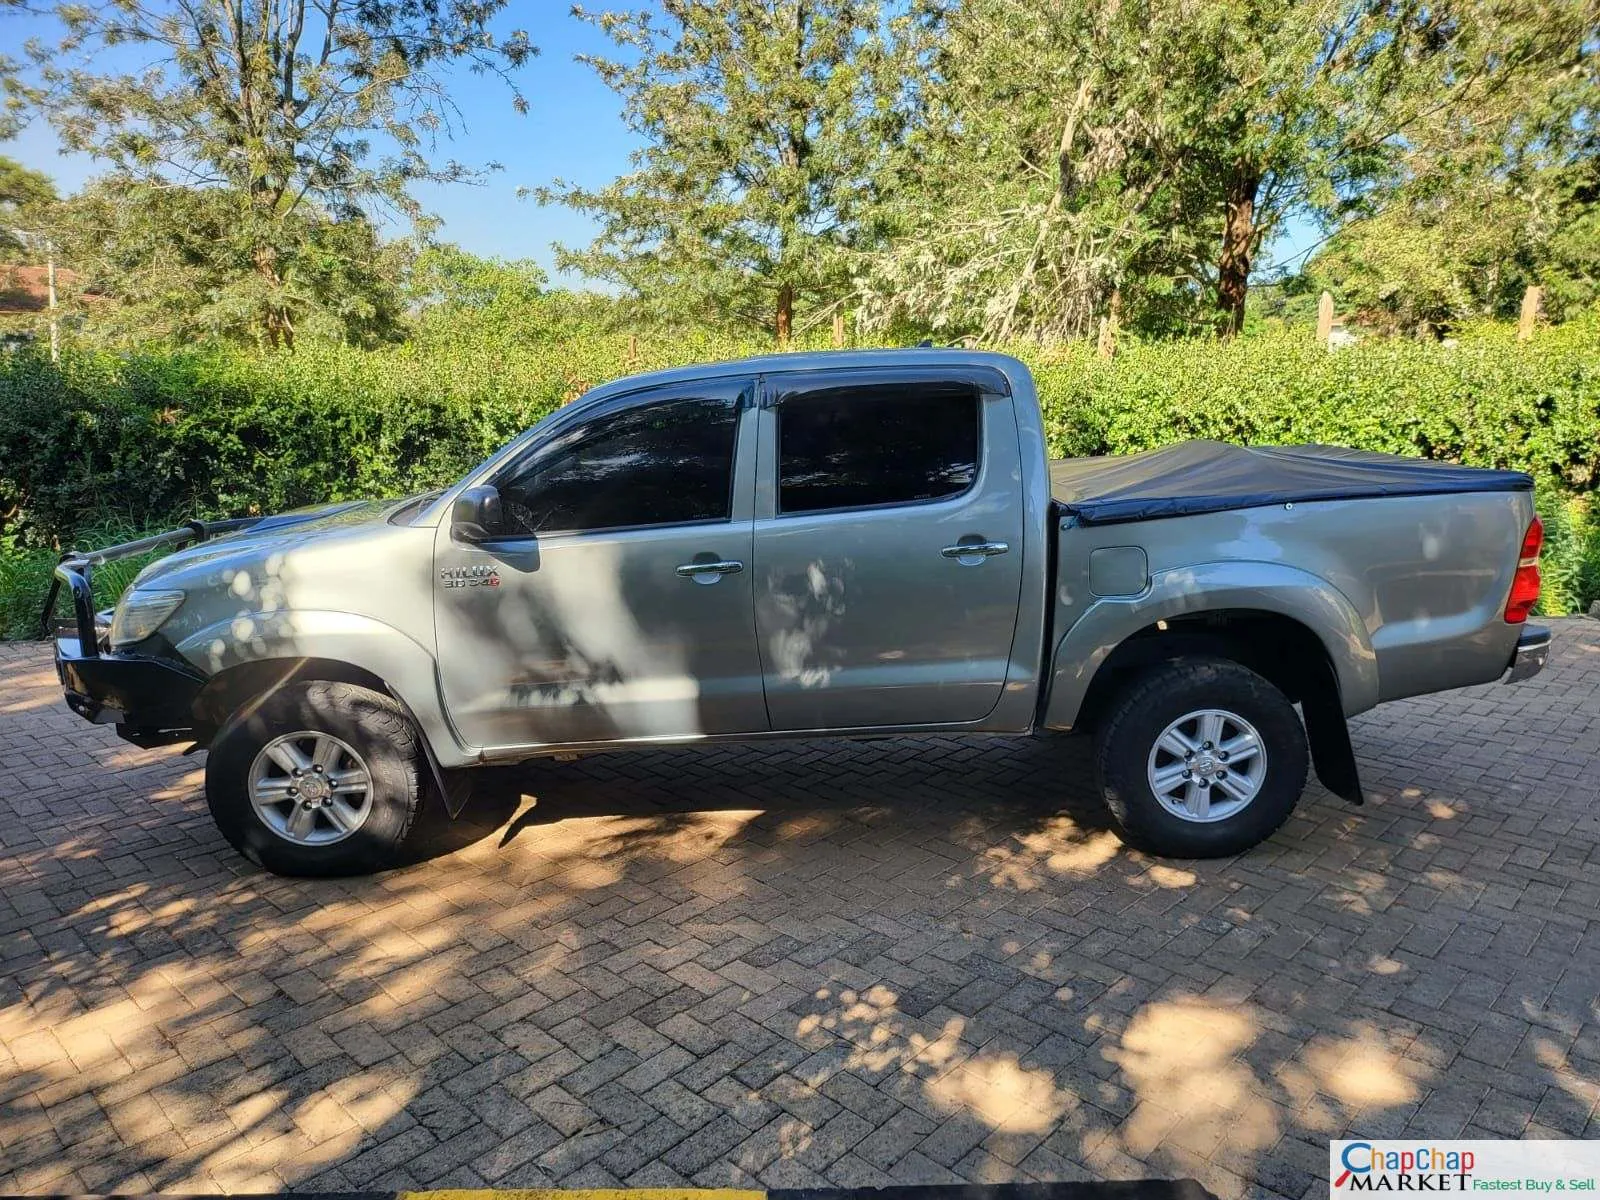 toyota Hilux for sale trade in ok installments new Auto